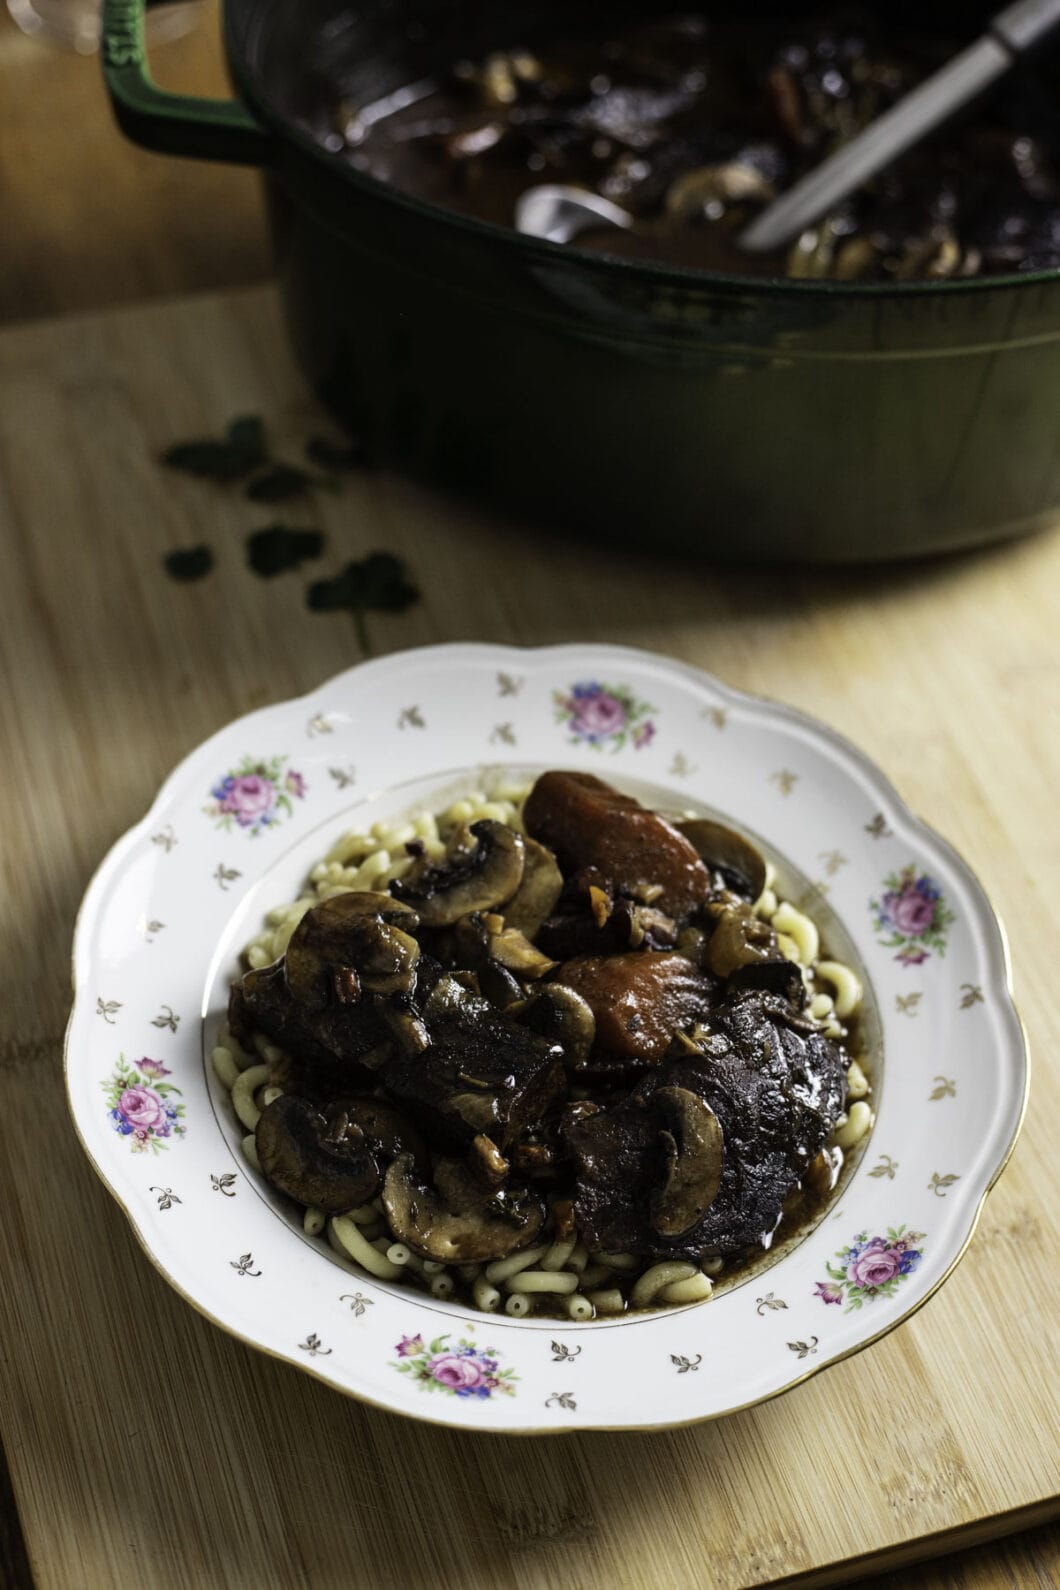 Beef bourguignon with carrots and mushrooms